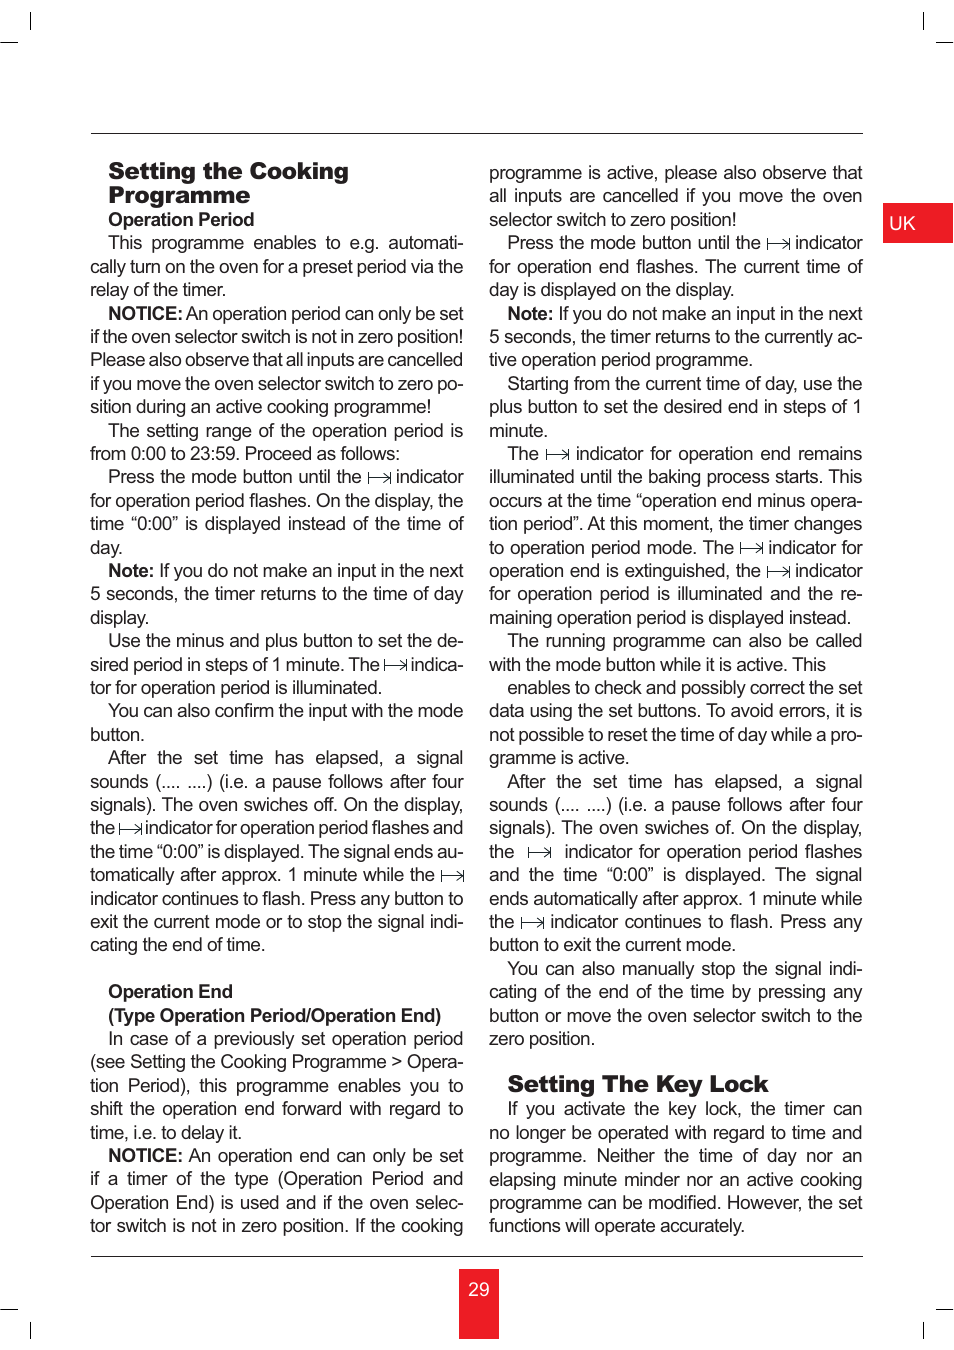 Setting the cooking programme, Setting the key lock | KORTING OKB481CRC User Manual | Page 29 / 36